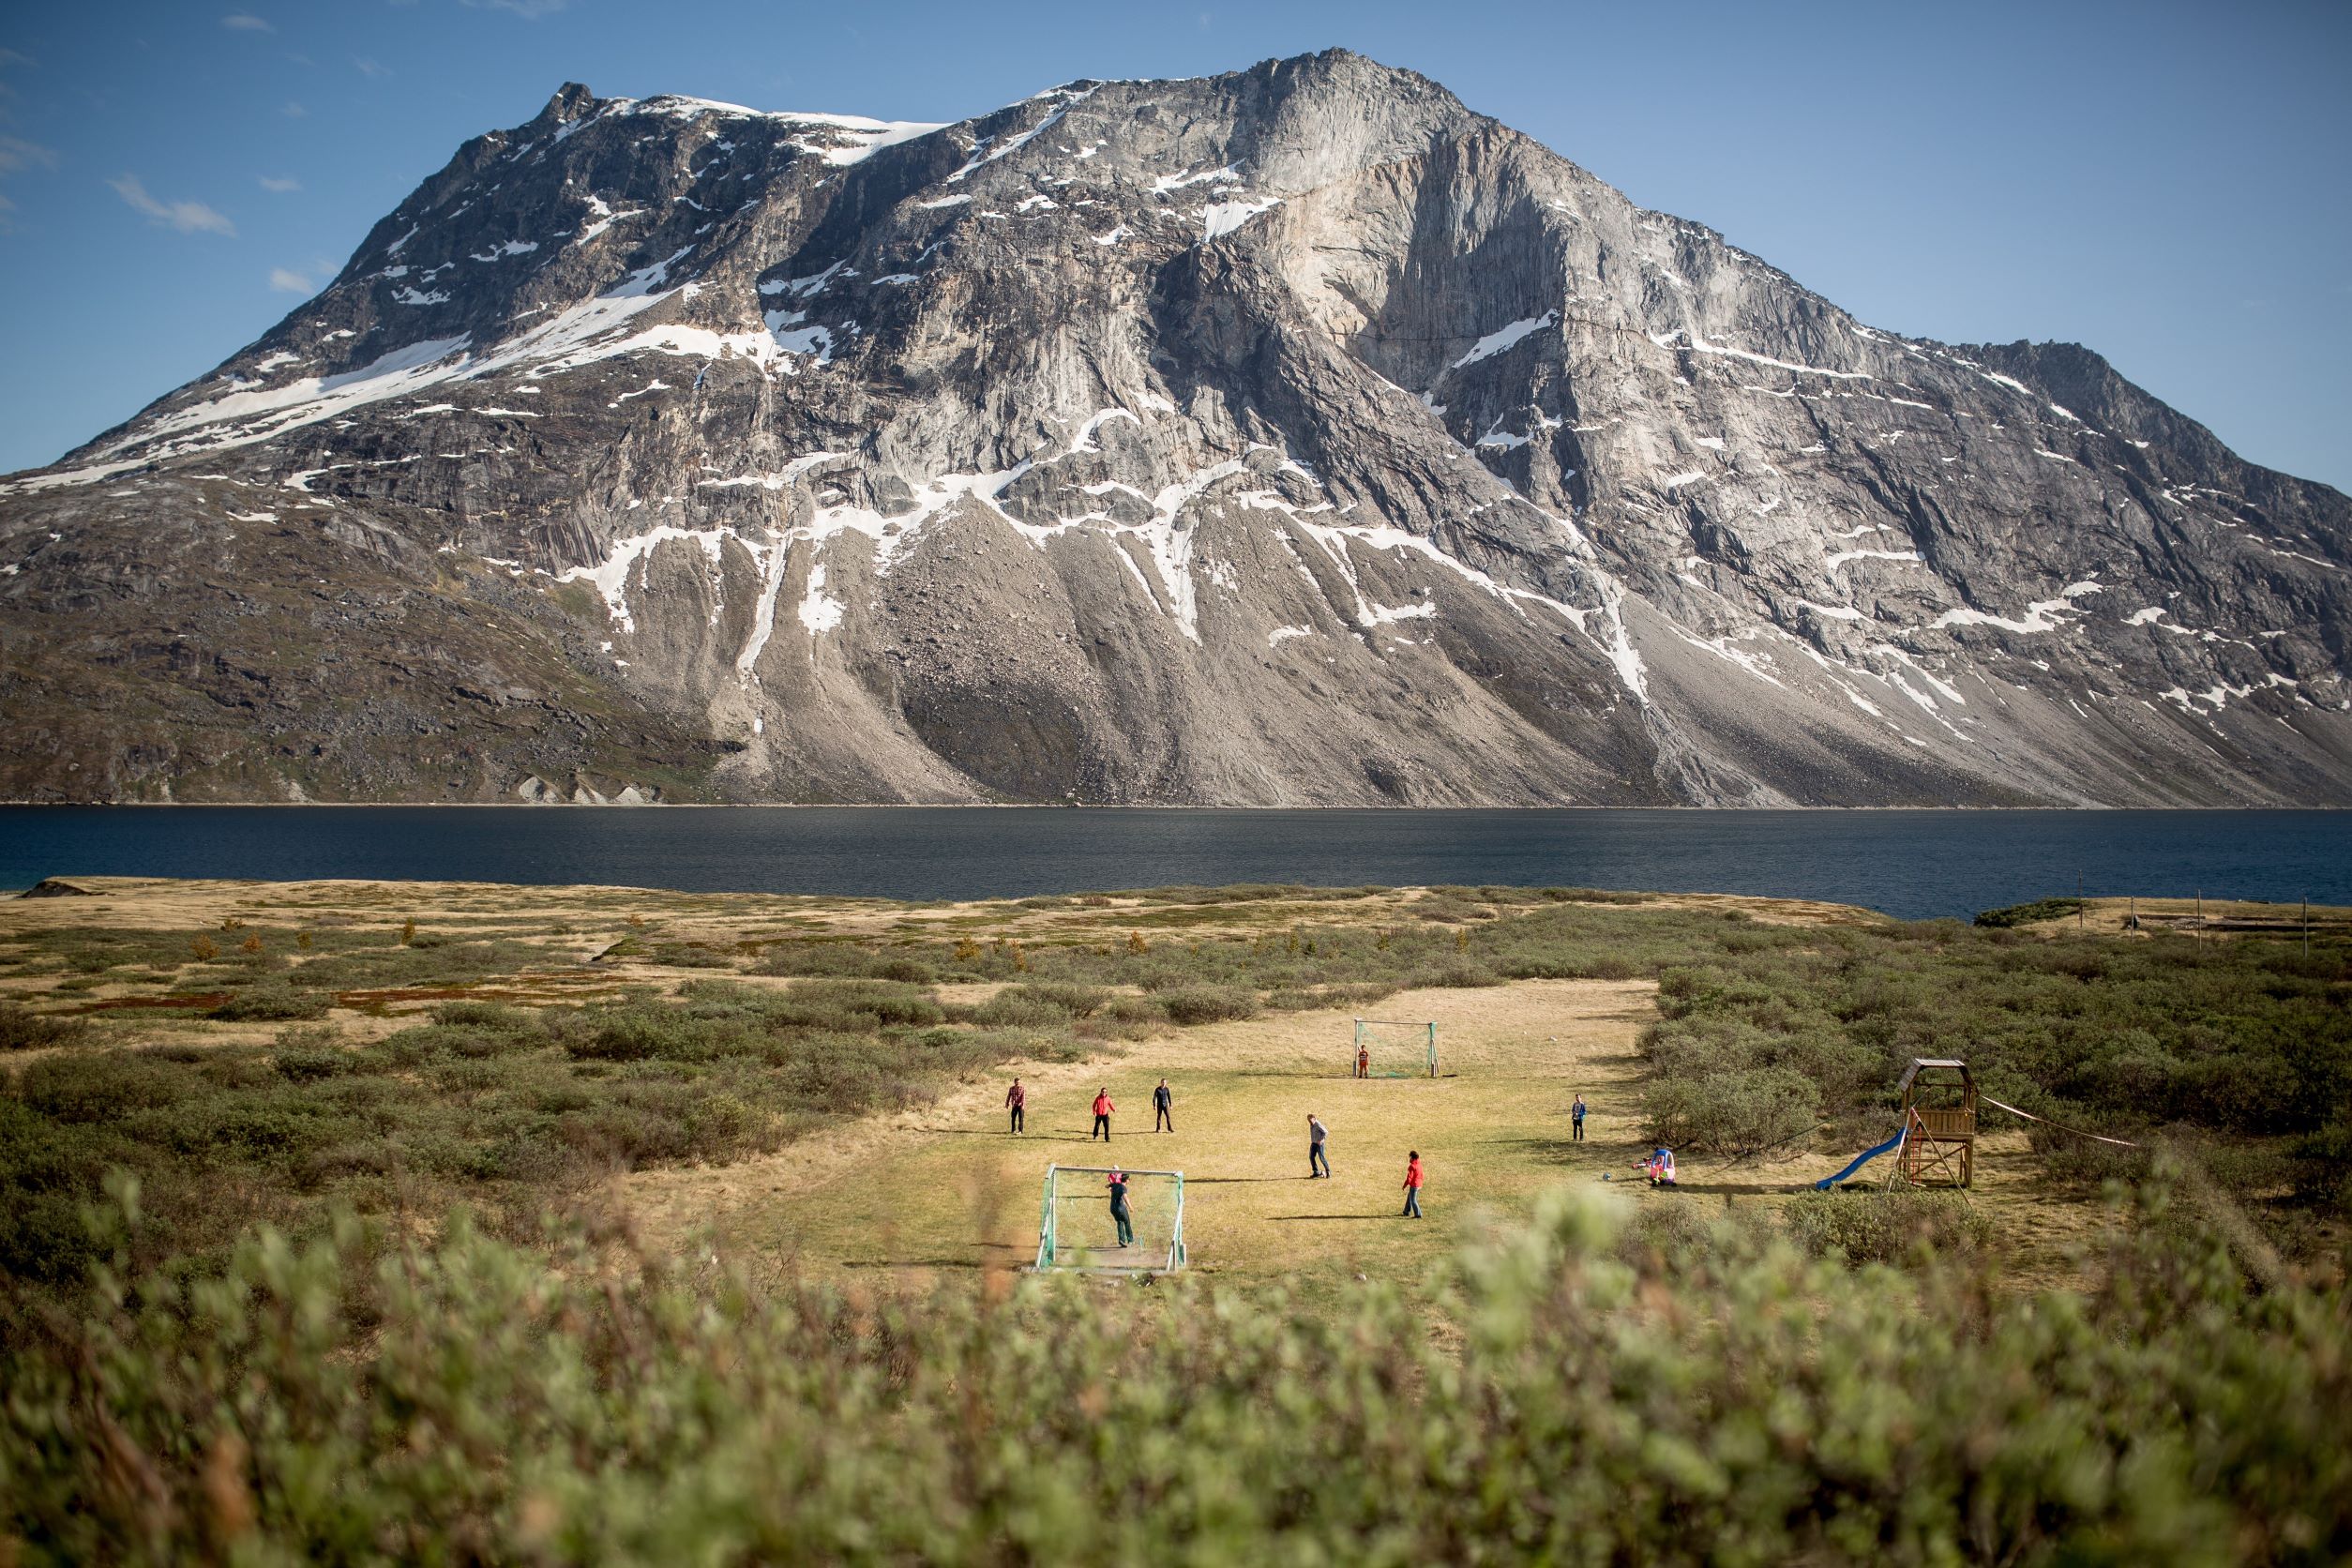 The backcountry football field at Qooqqut, close to Nuuk